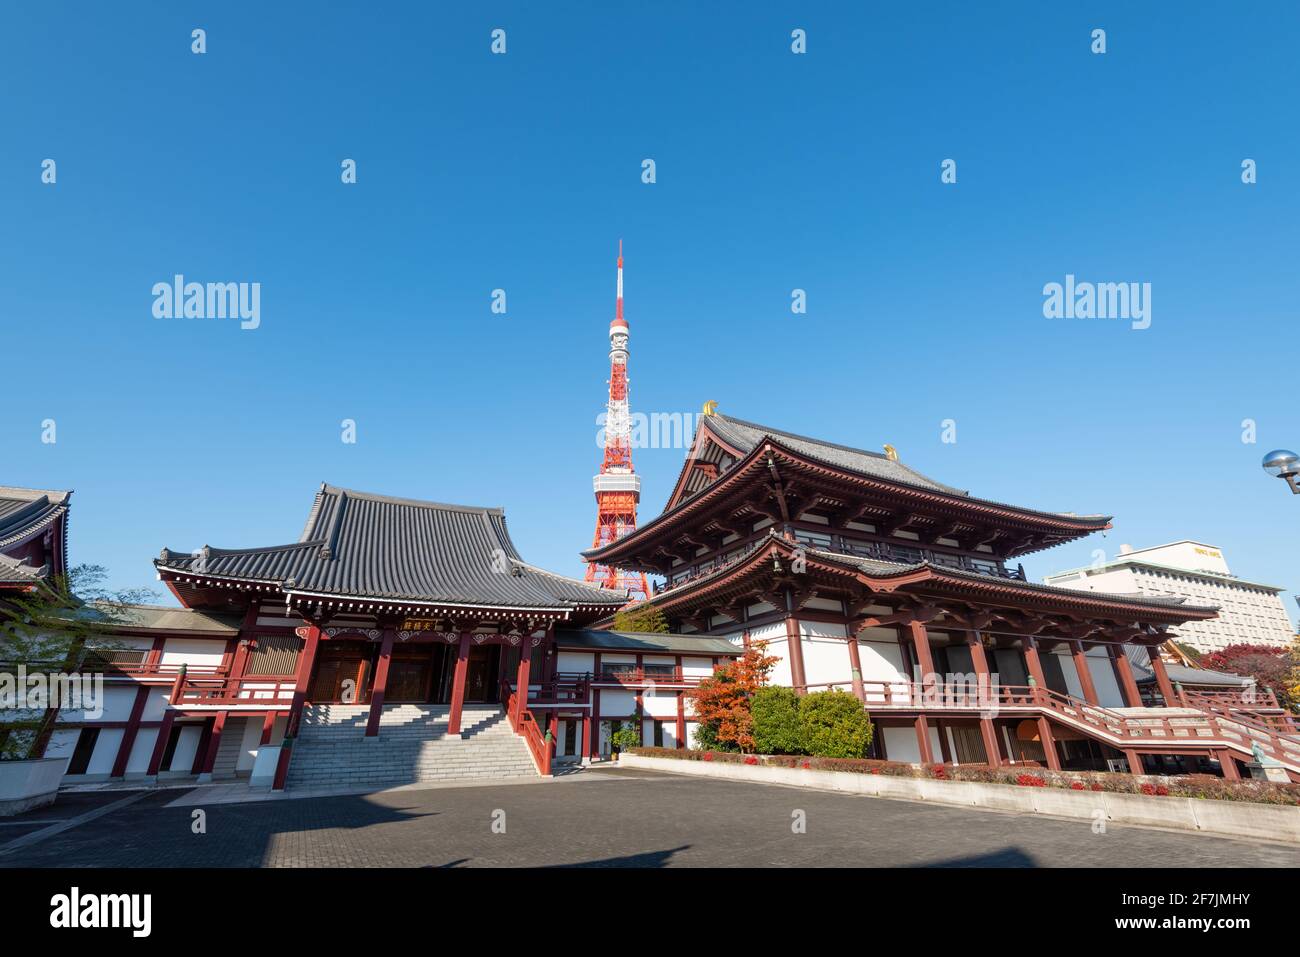 Tokyo, Japan - December 09, 2015: Japanese zojoji temple near the Tokyo tower . Zojo-ji is notable for its relationship with the Tokugawa clan, the ru Stock Photo